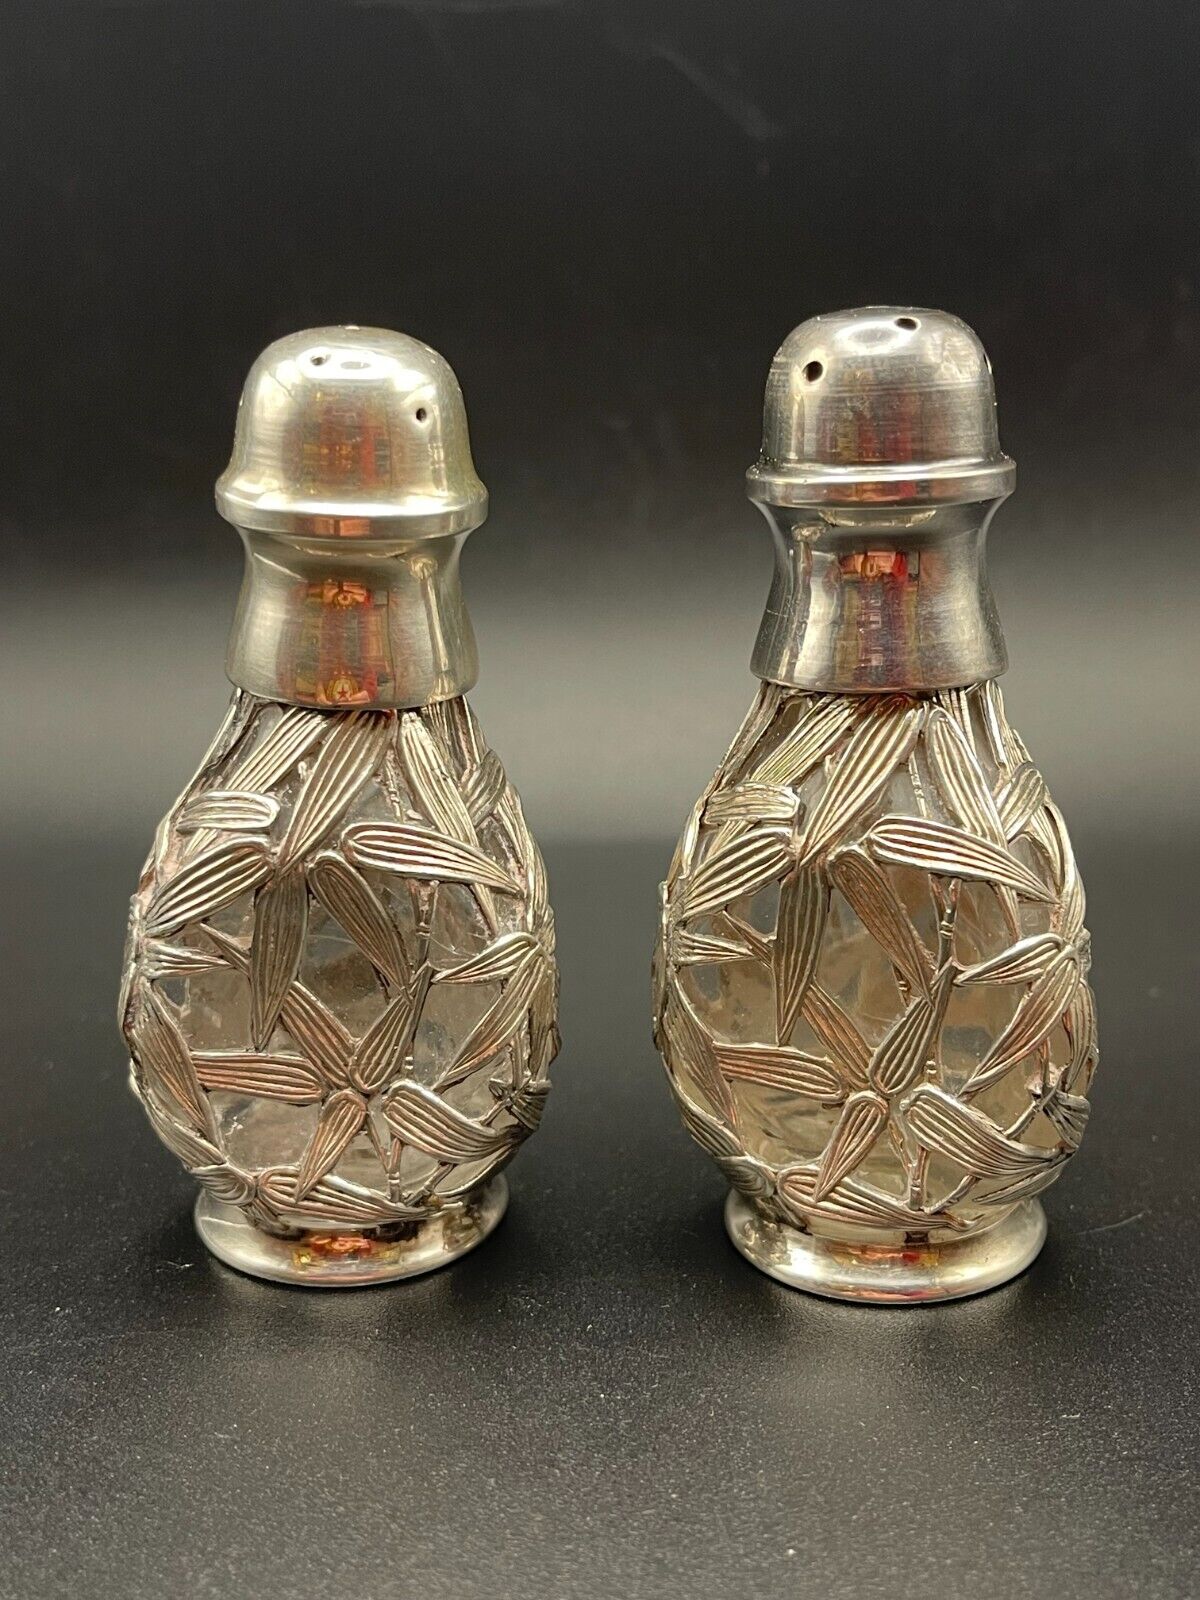 Exquisite Antique Sterling Silver 950 Salt and Pepper Shakers with Bamboo Motif